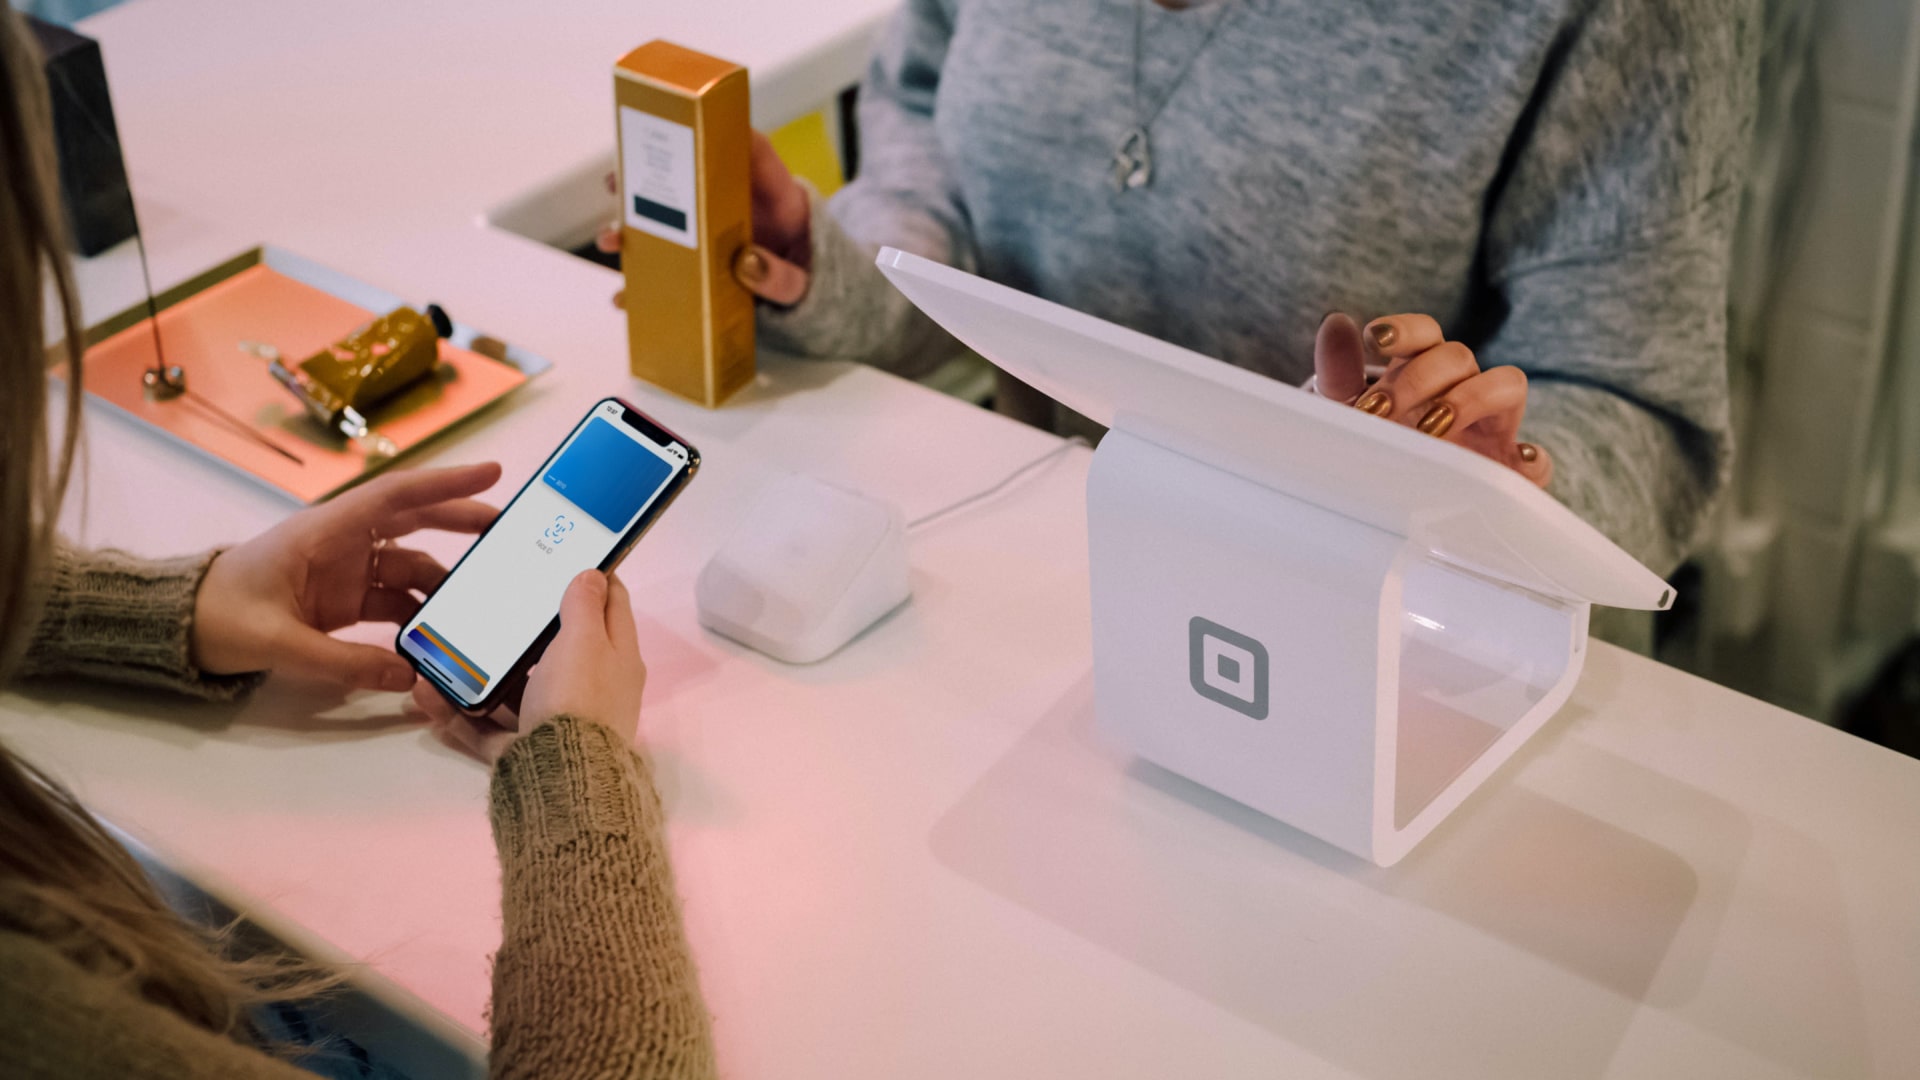 Smart devices for payments